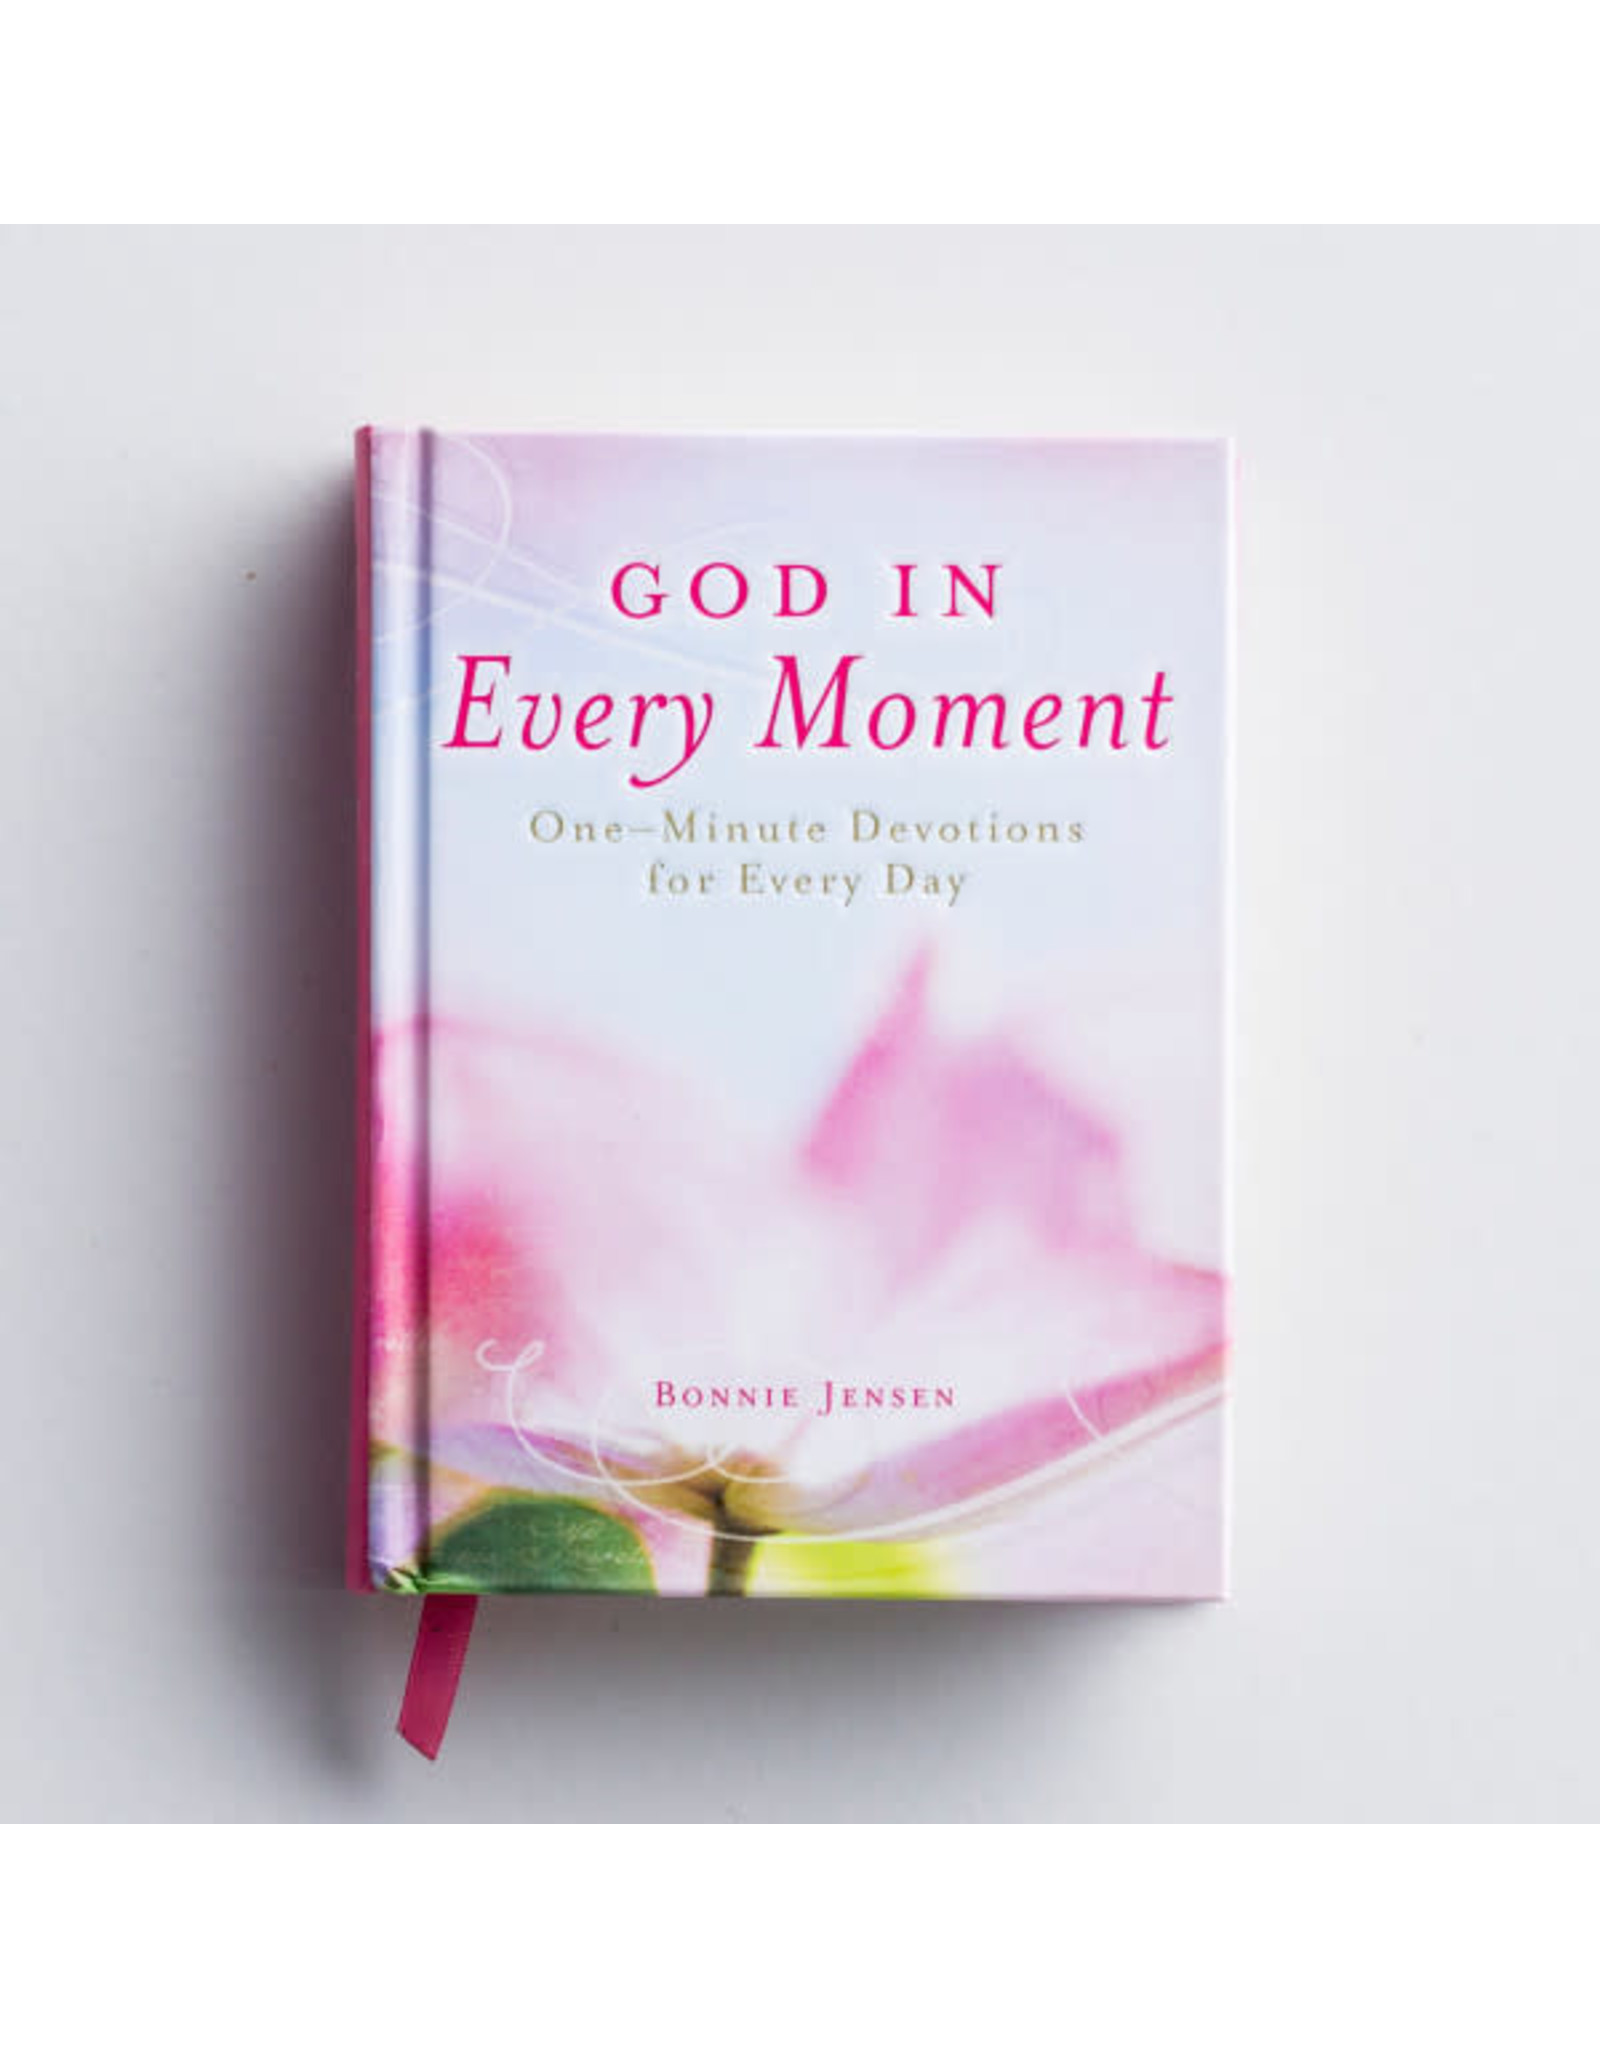 God in Every Moment: One-Minute Devotions for Every Day